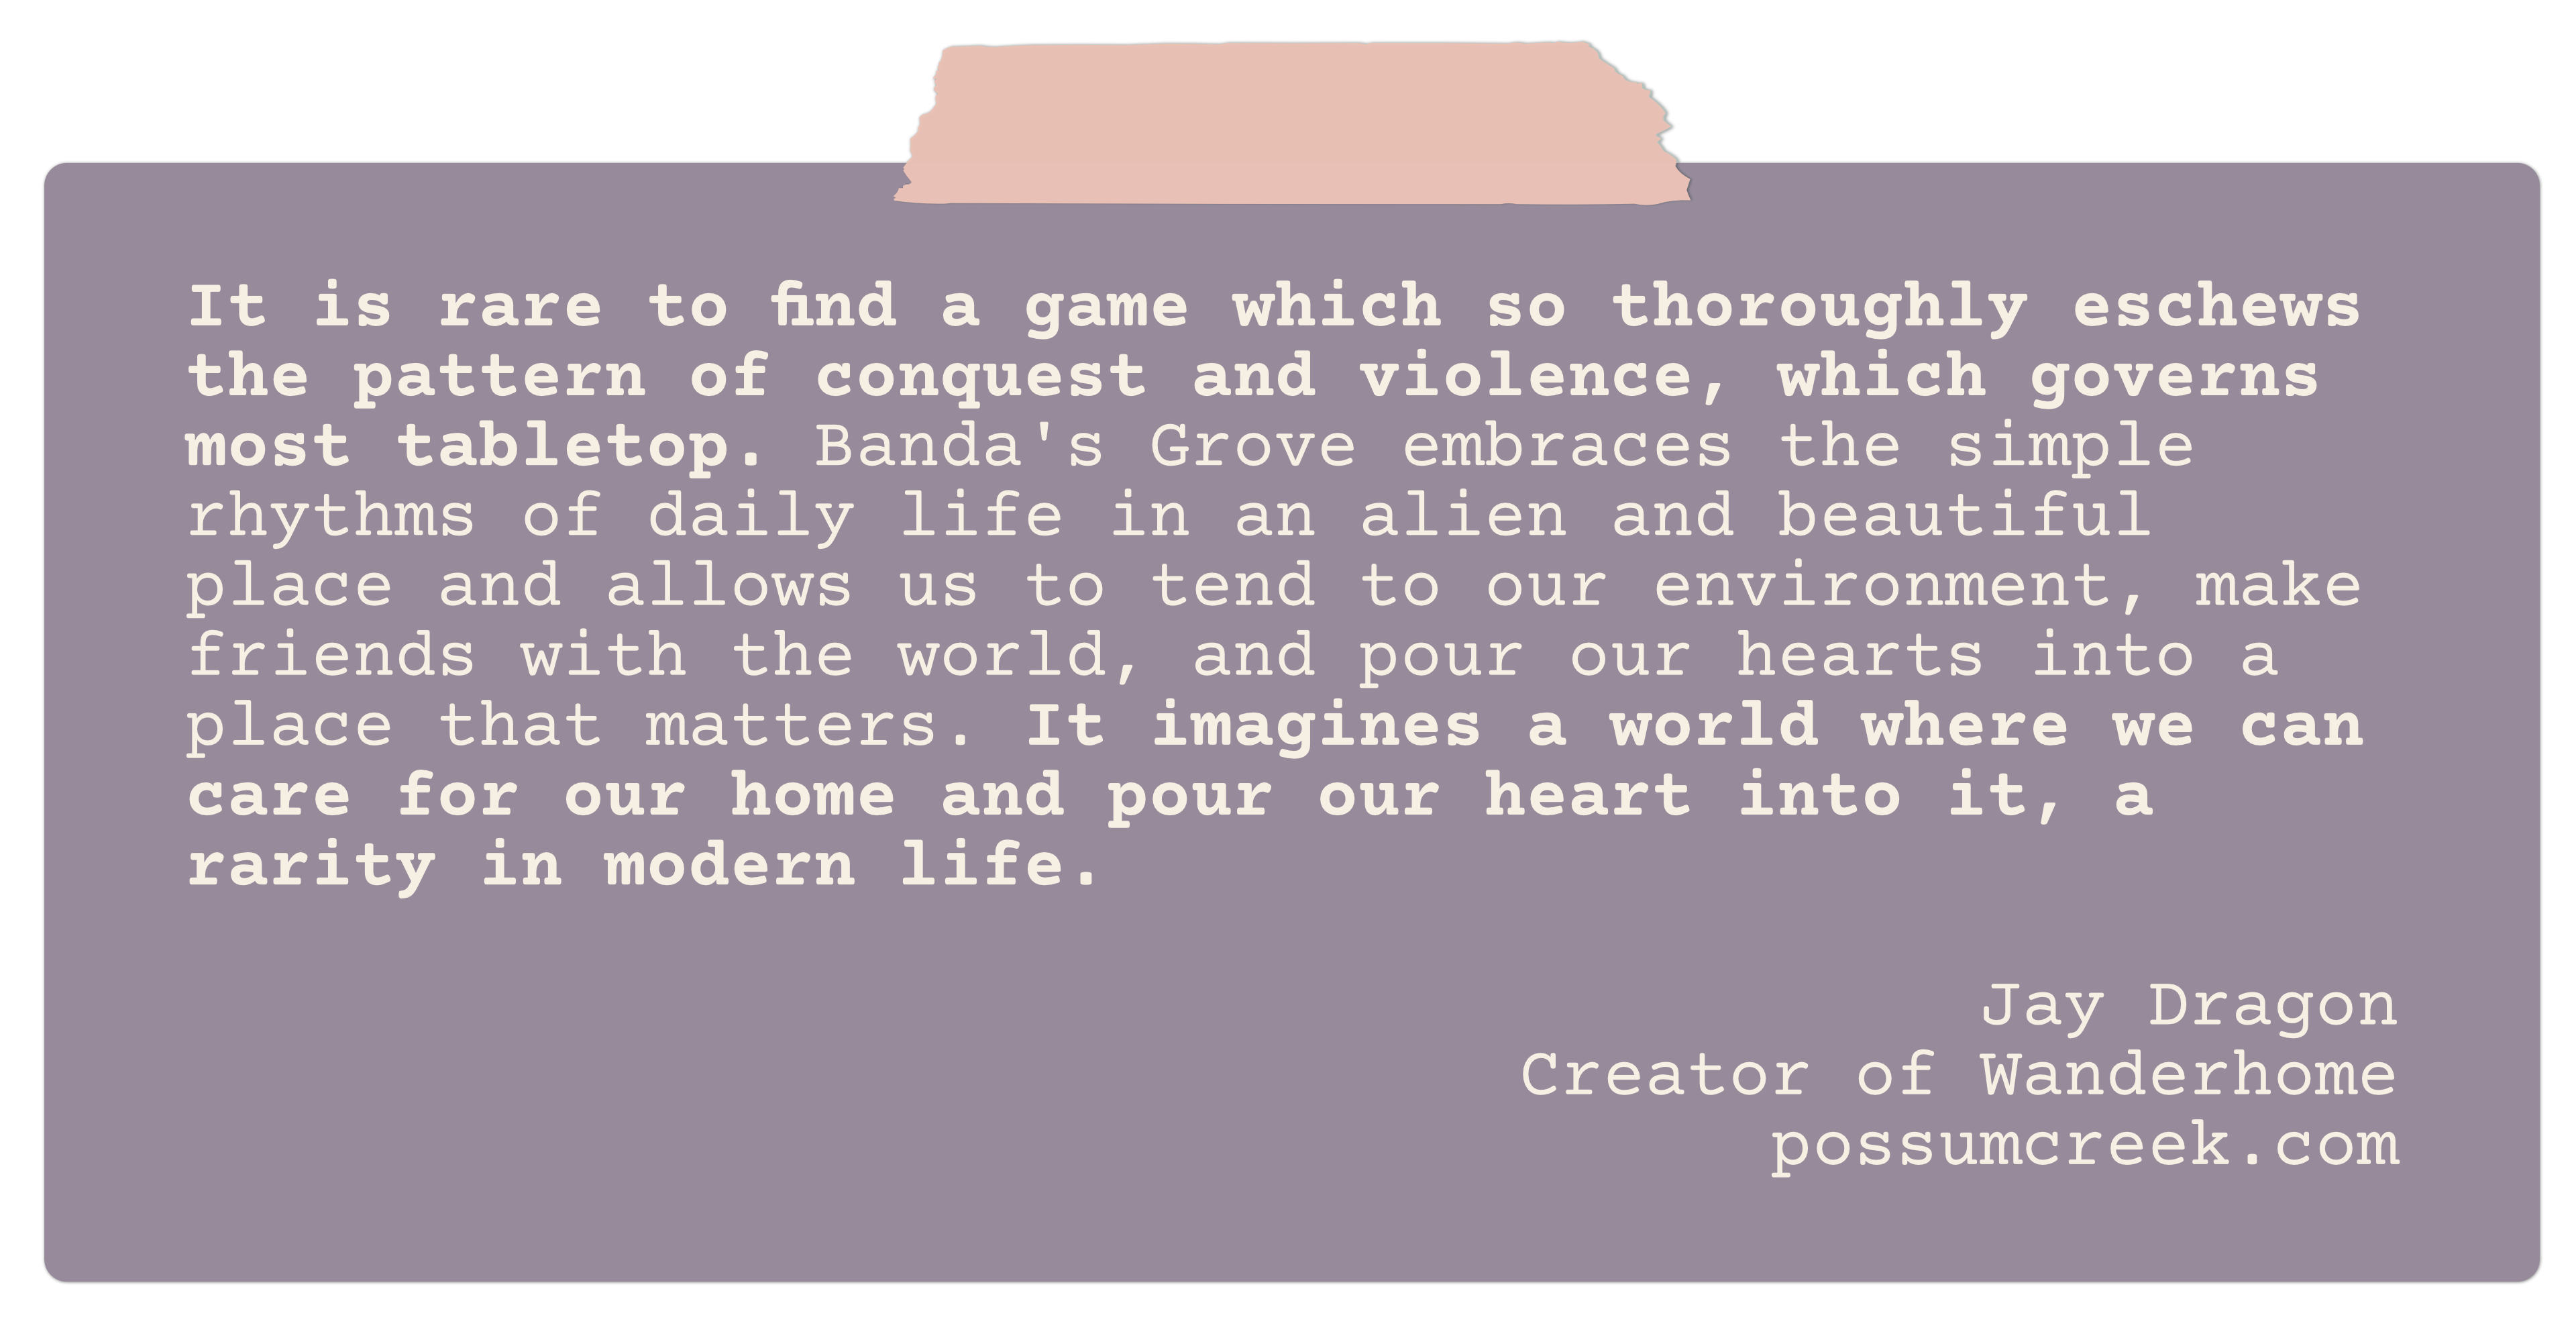 It is rare to find a game which so thoroughly eschews the pattern of conquest and violence, which governs most tabletop. <strong>Banda's Grove embraces the simple rhythms of daily life in an alien and beautiful place</strong> and allows us to tend to our environment, make friends with the world, and pour our hearts into a place that matters. It imagines a world where we can care for our home and pour our heart into it, a rarity in modern life. Jay Dragon Creator of Wanderhome possumcreek.com